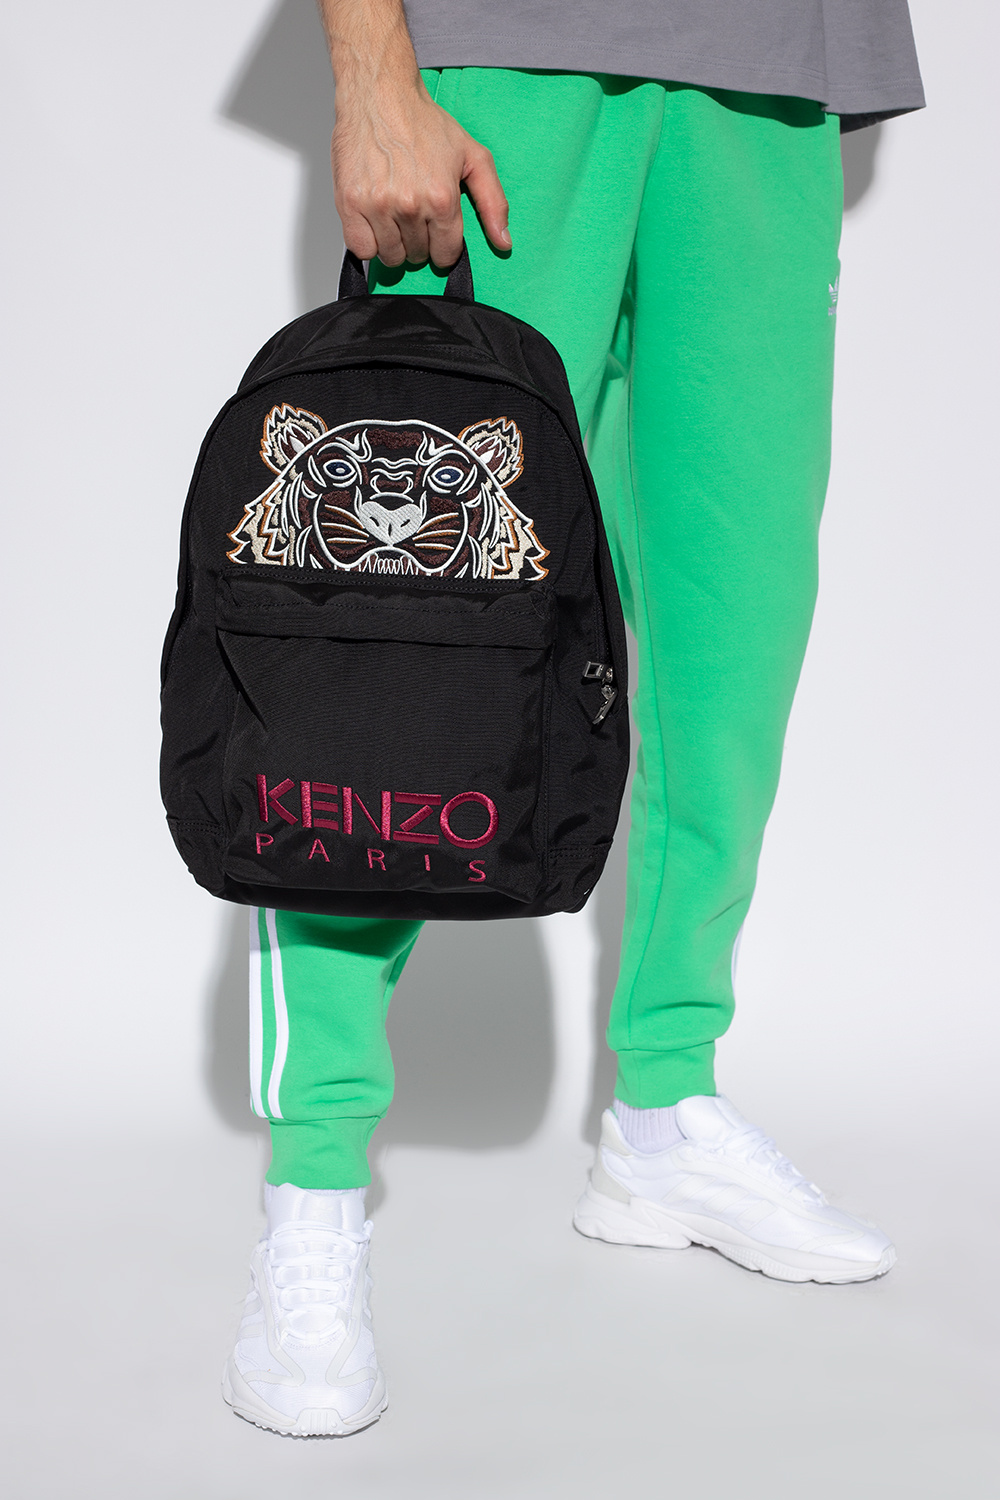 Kenzo real backpack with tiger motif